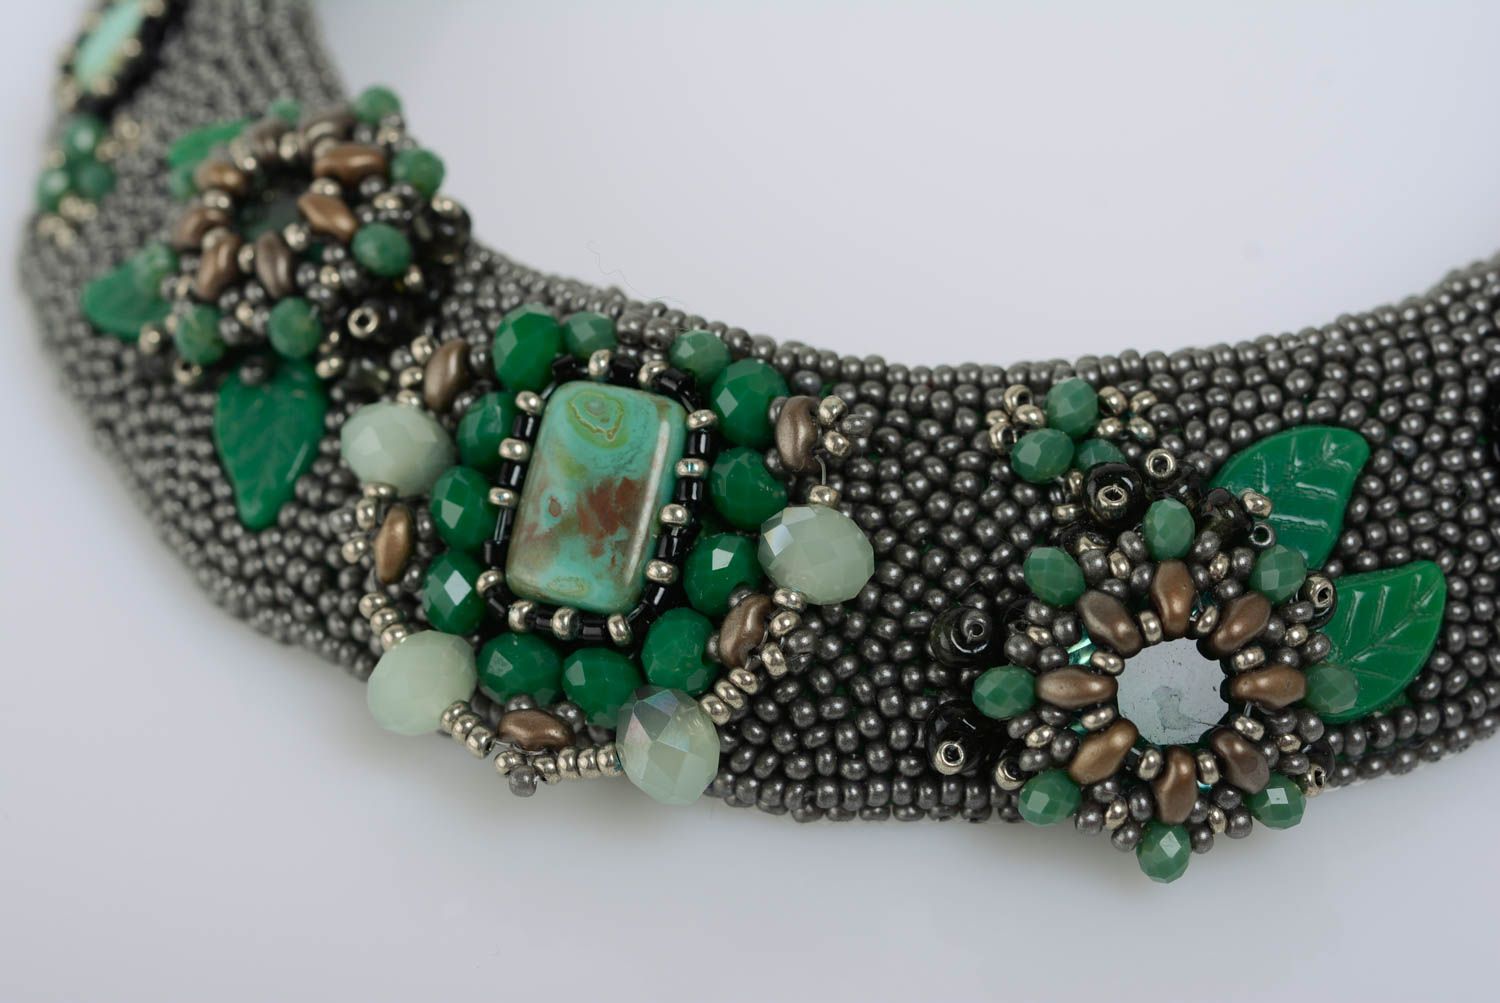 Handmade volume massive bead embroidered necklace with natural stones on chain photo 2